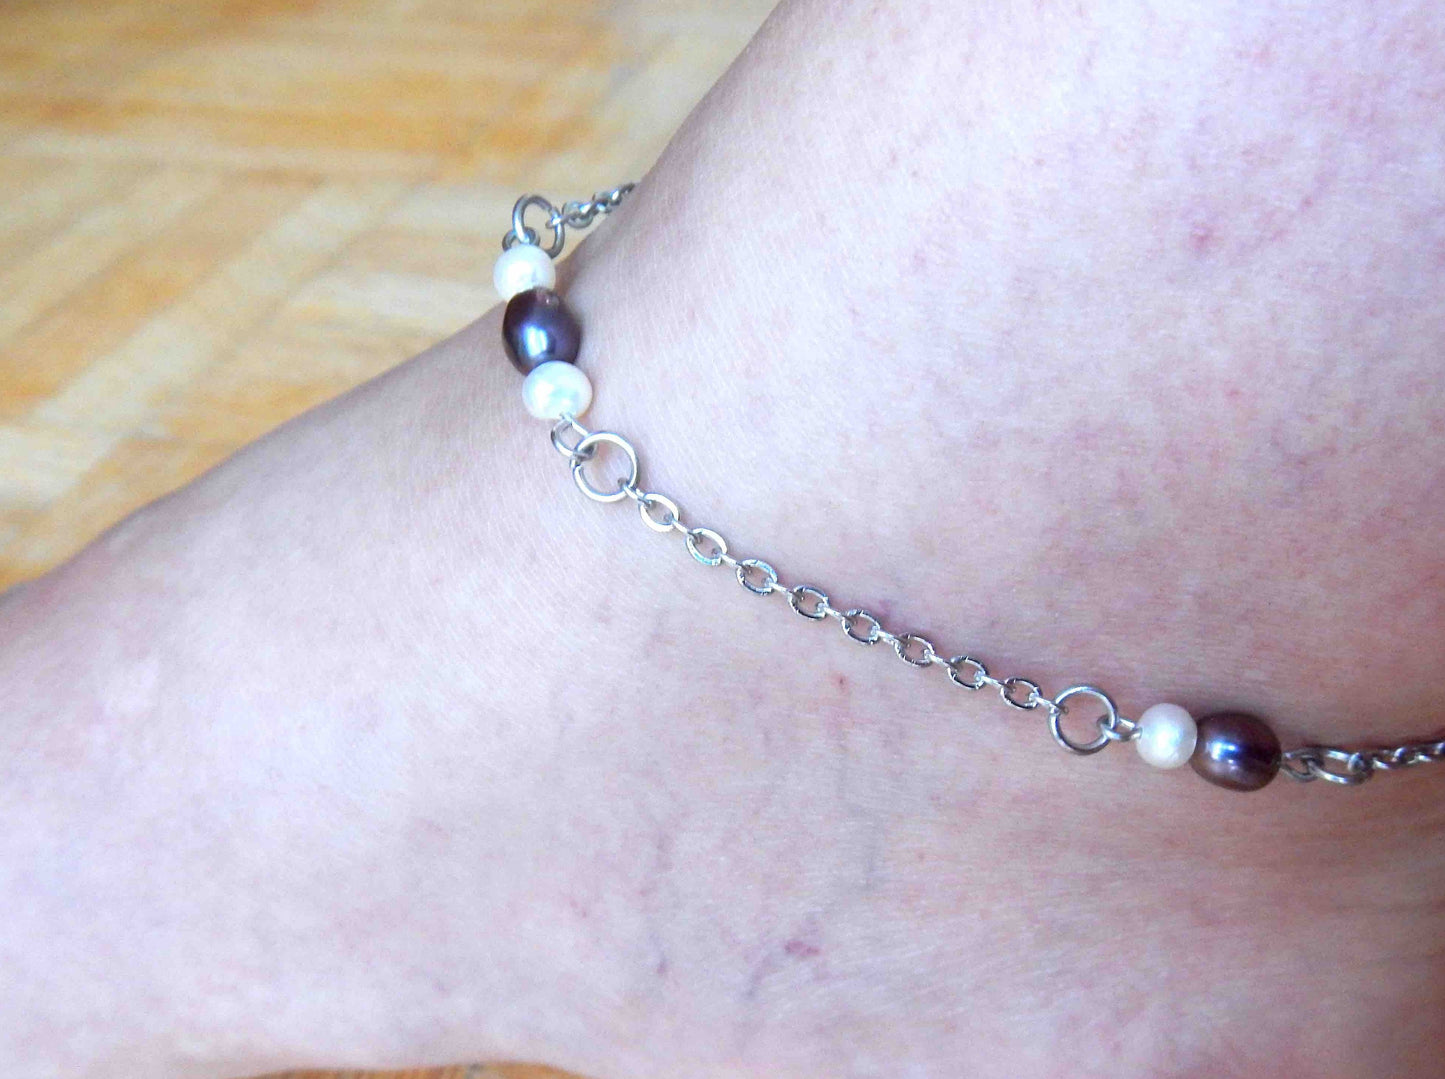 Anklet with iridescent violet and white natural freshwater pearls on stainless steel chain